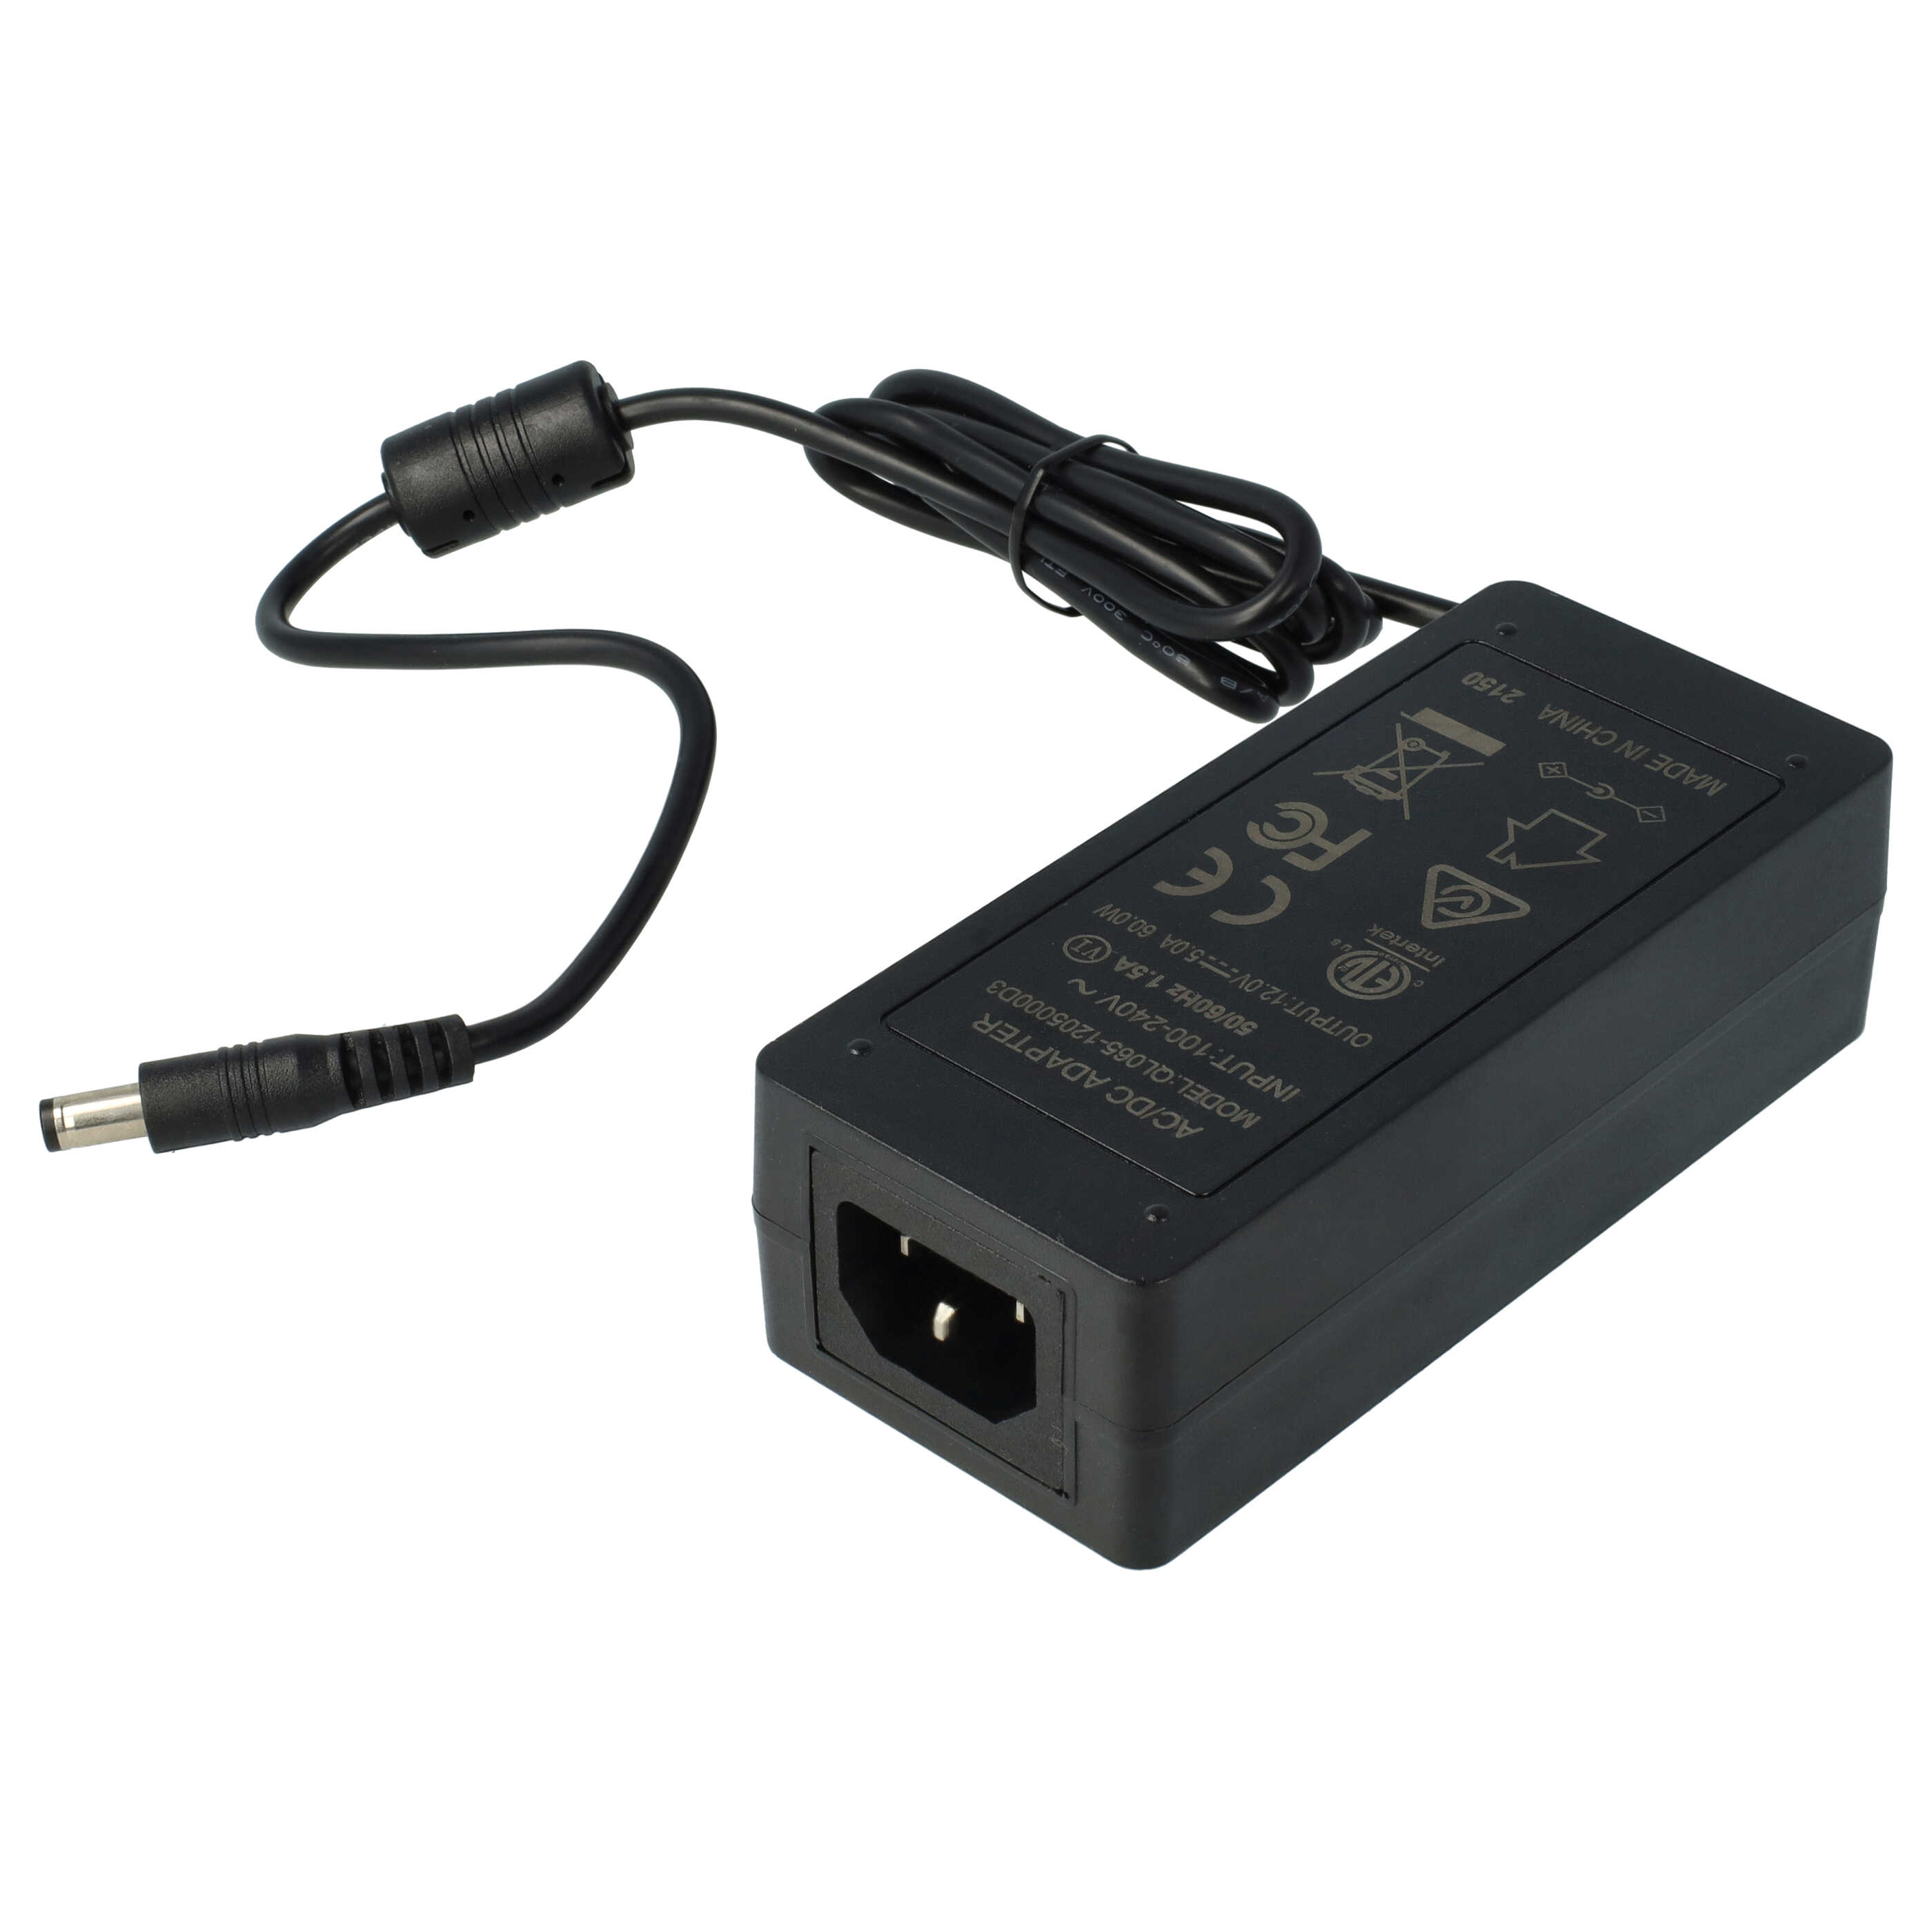 Charger + Mains Adapter Suitable for Motorola HNN9013 Radio Batteries - 7.2 V, 0.5 A